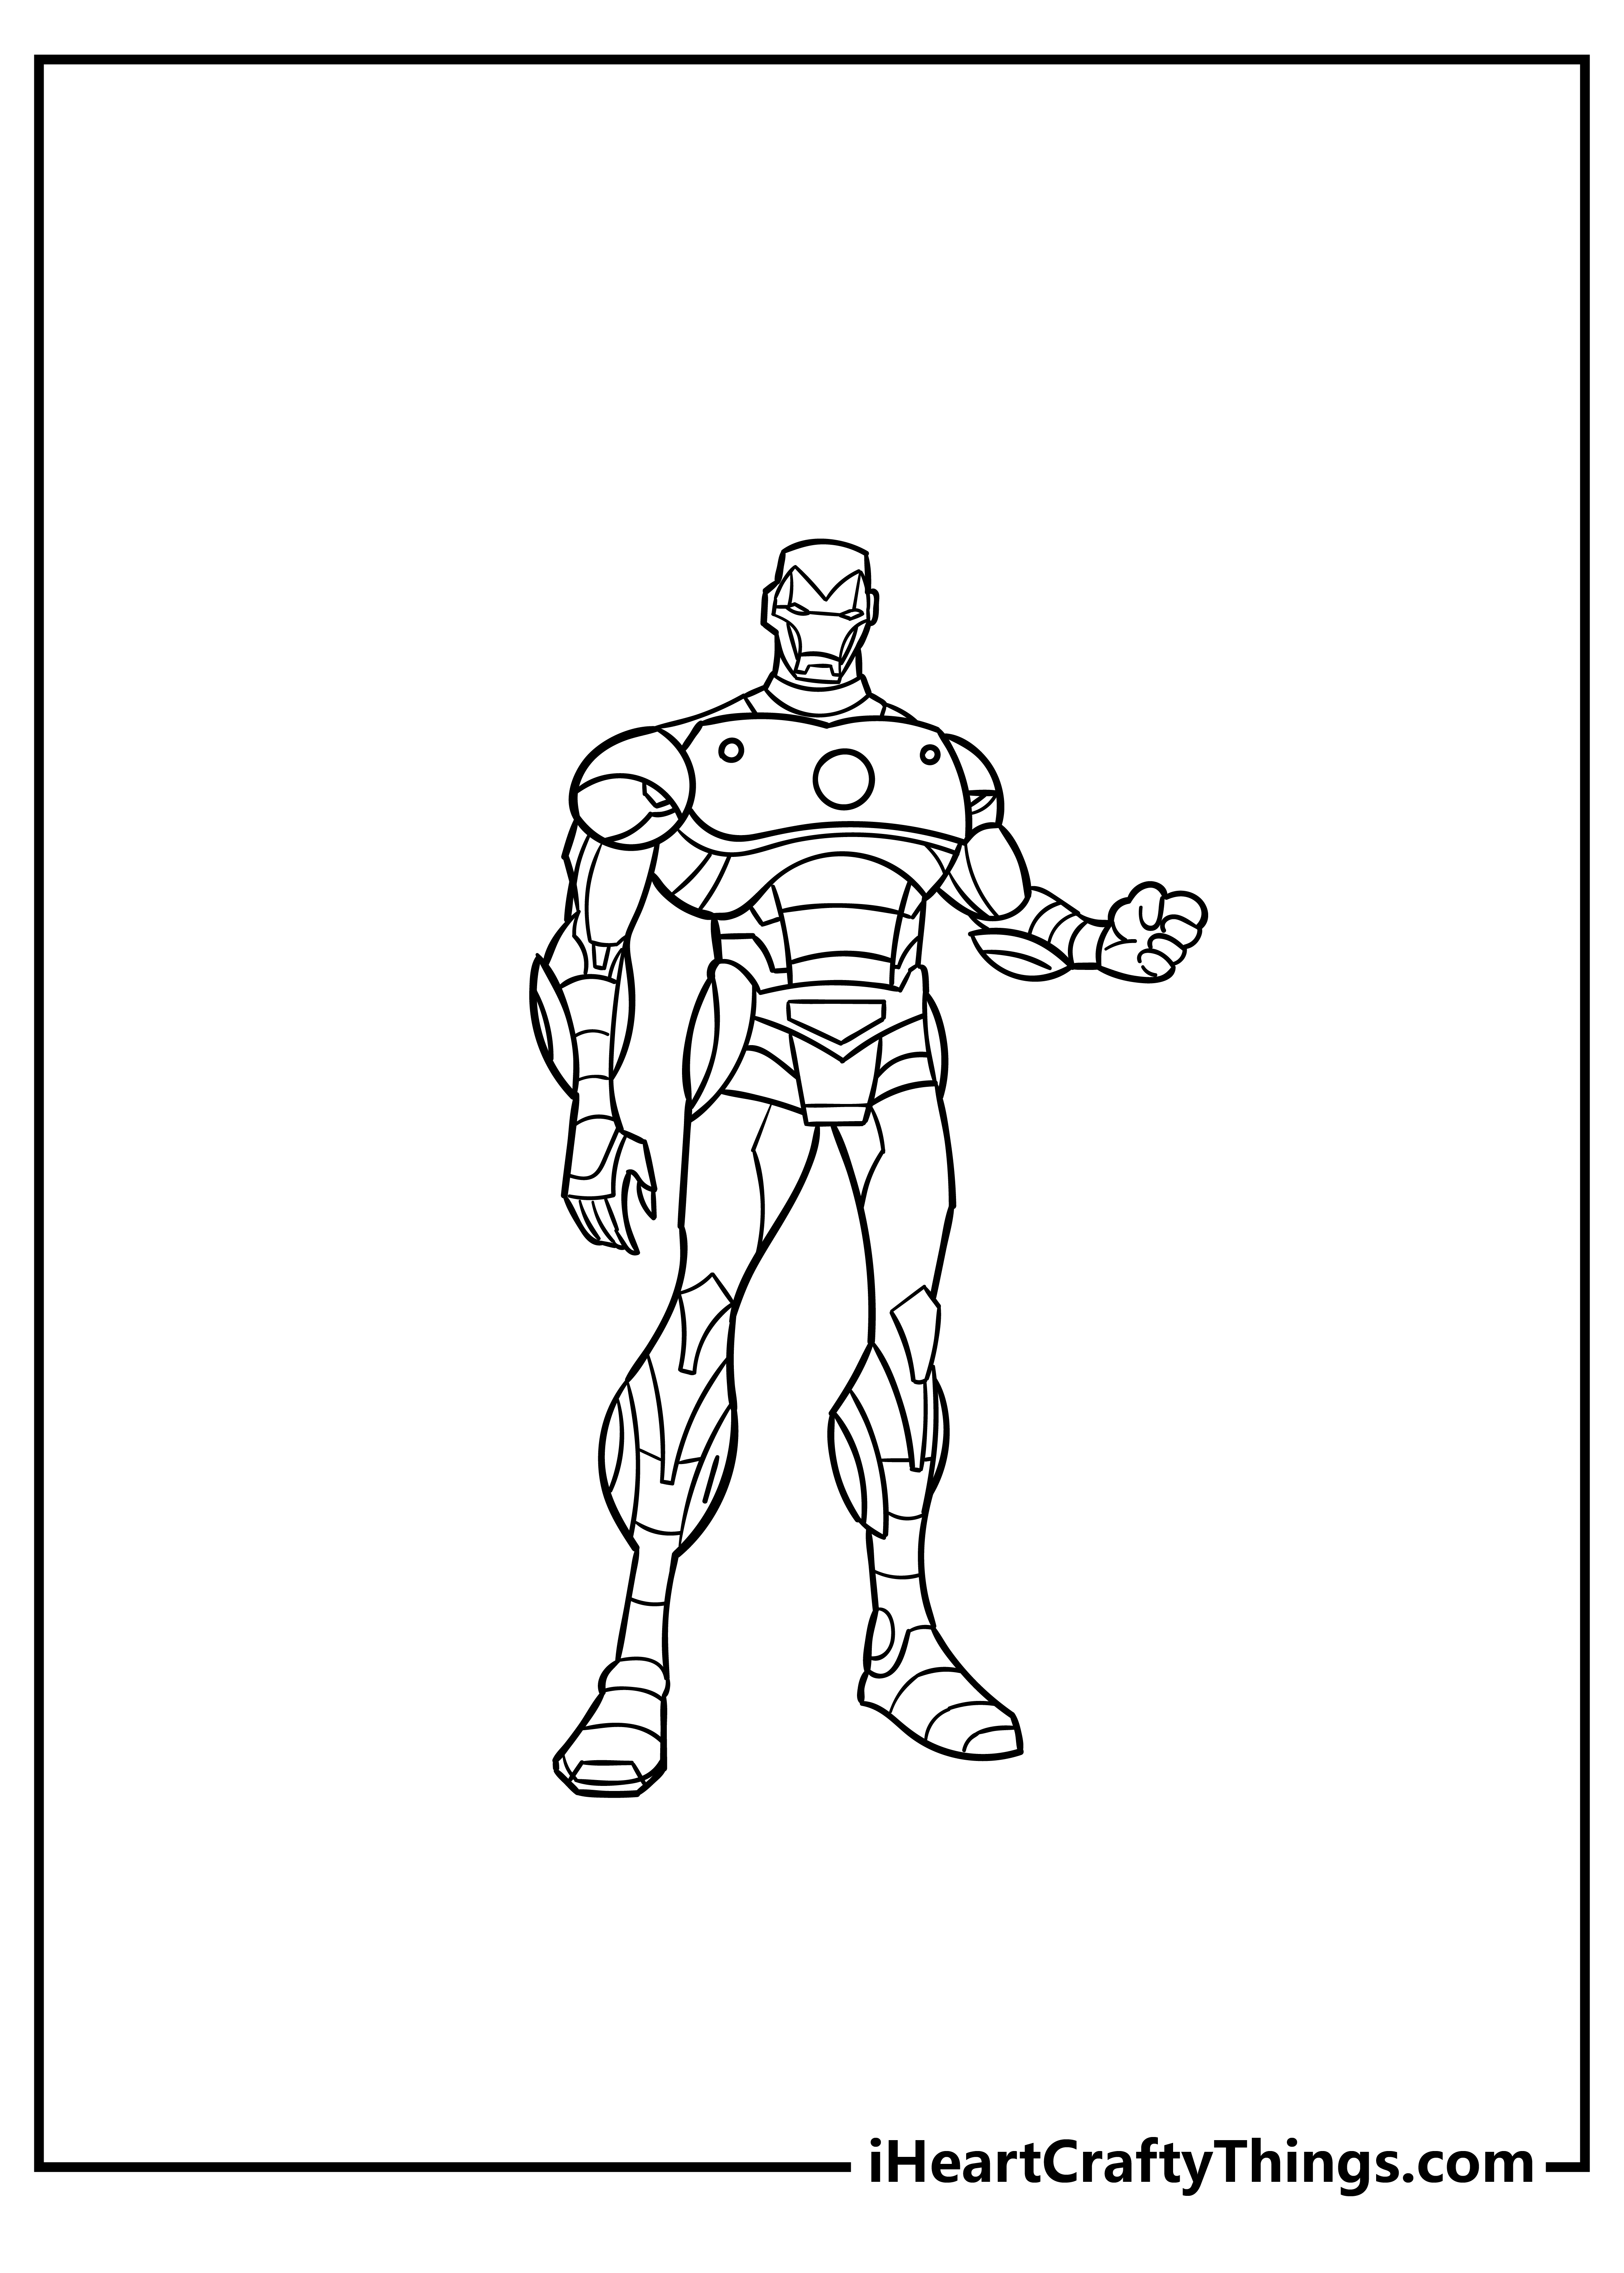 Iron Man Coloring Pages for preschoolers free printable